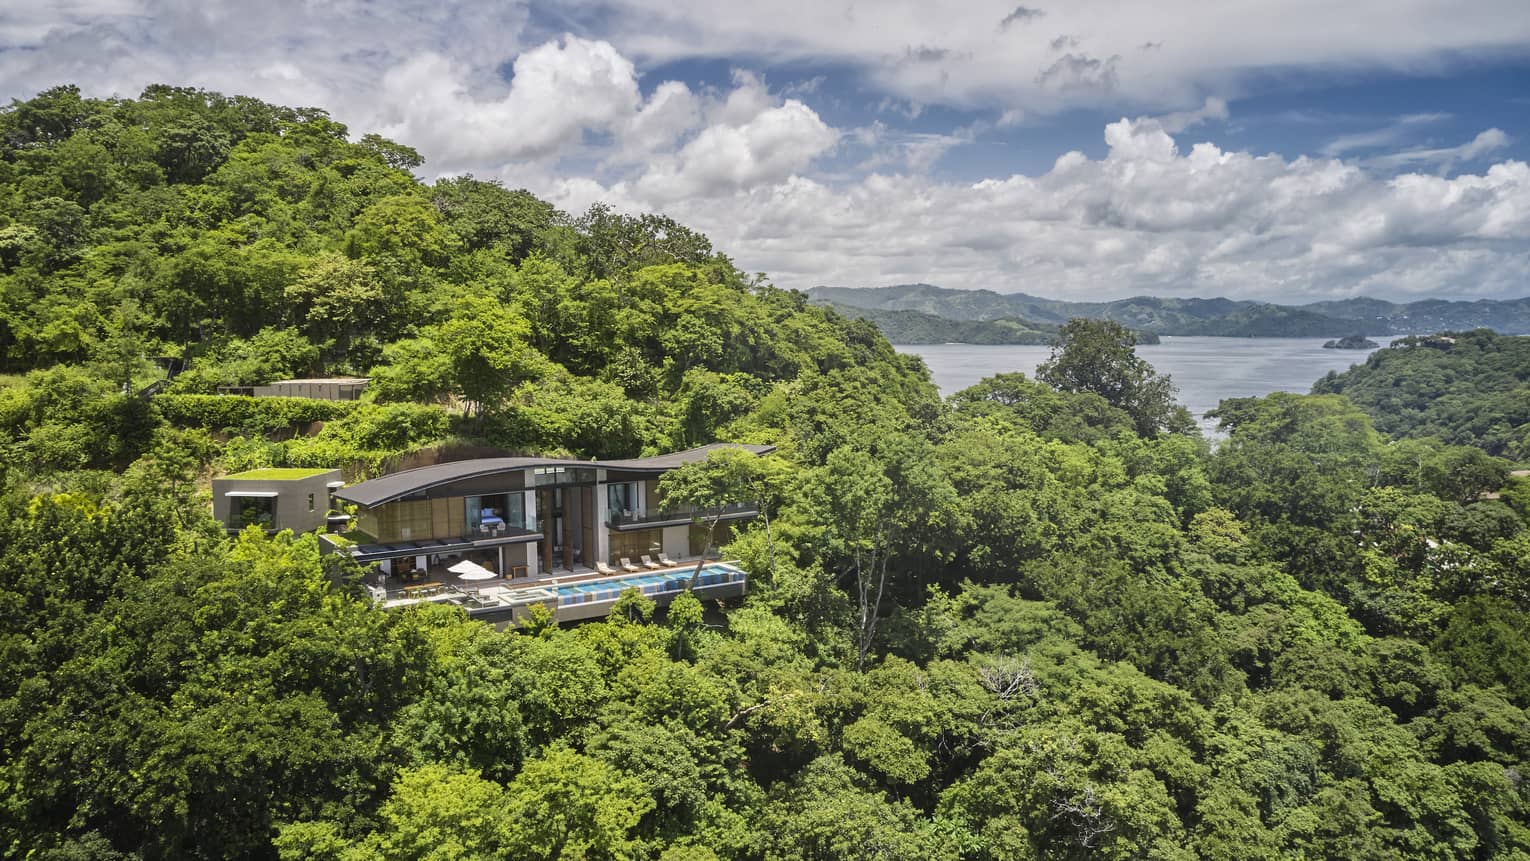 Outdoor terrace of a private villa nestled in the trees in Costa Rica